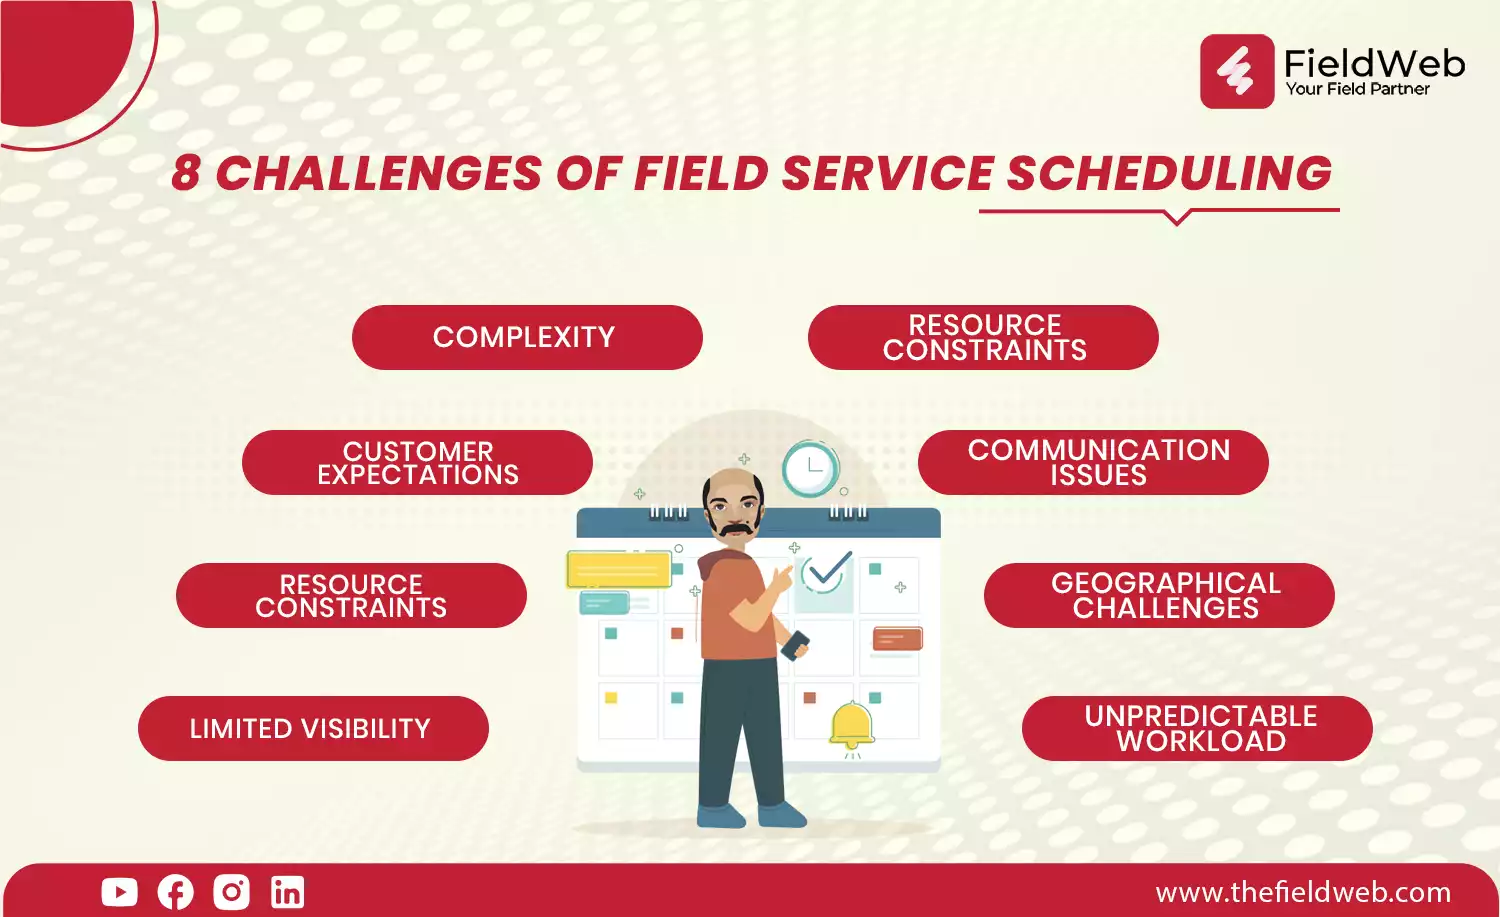 image is displaying the challenges occurred in field service scheduling. The image is displaying the top 8 challenges of field service scheduling